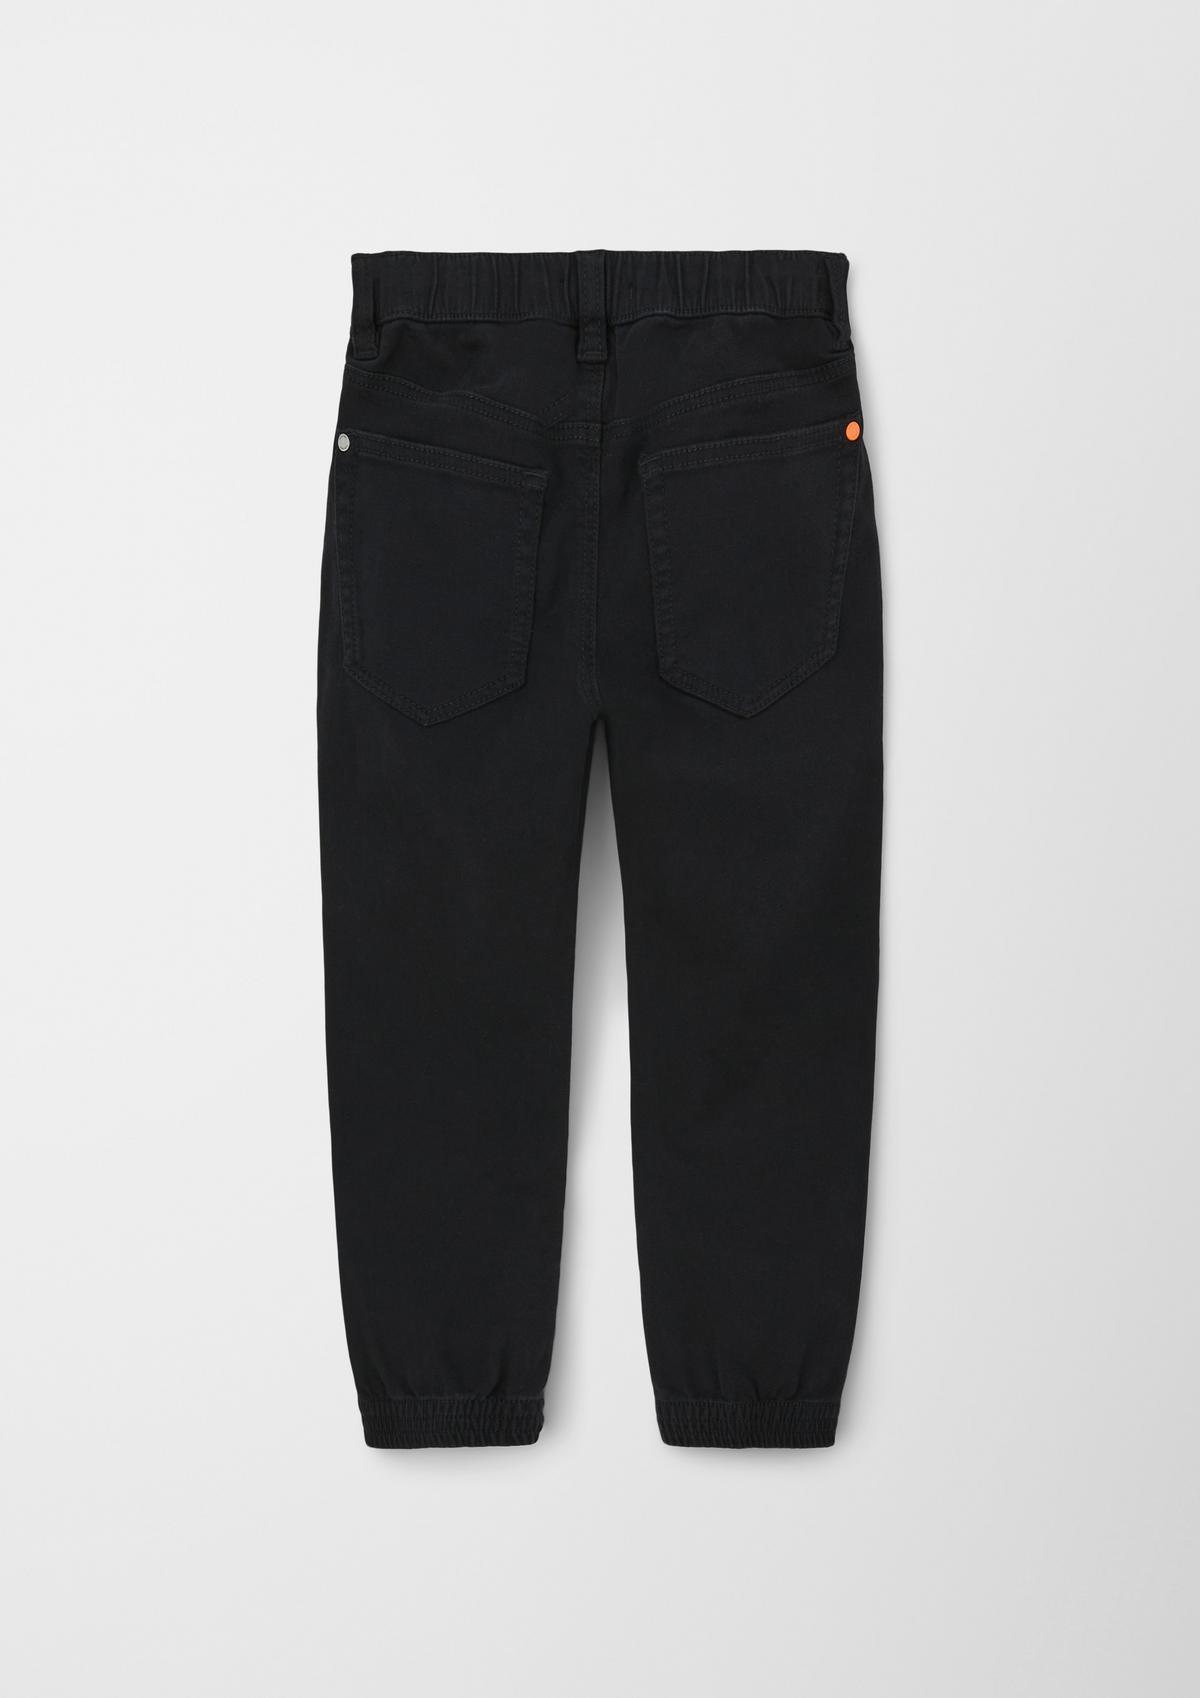 s.Oliver Brad joggers: trousers with an elasticated waistband